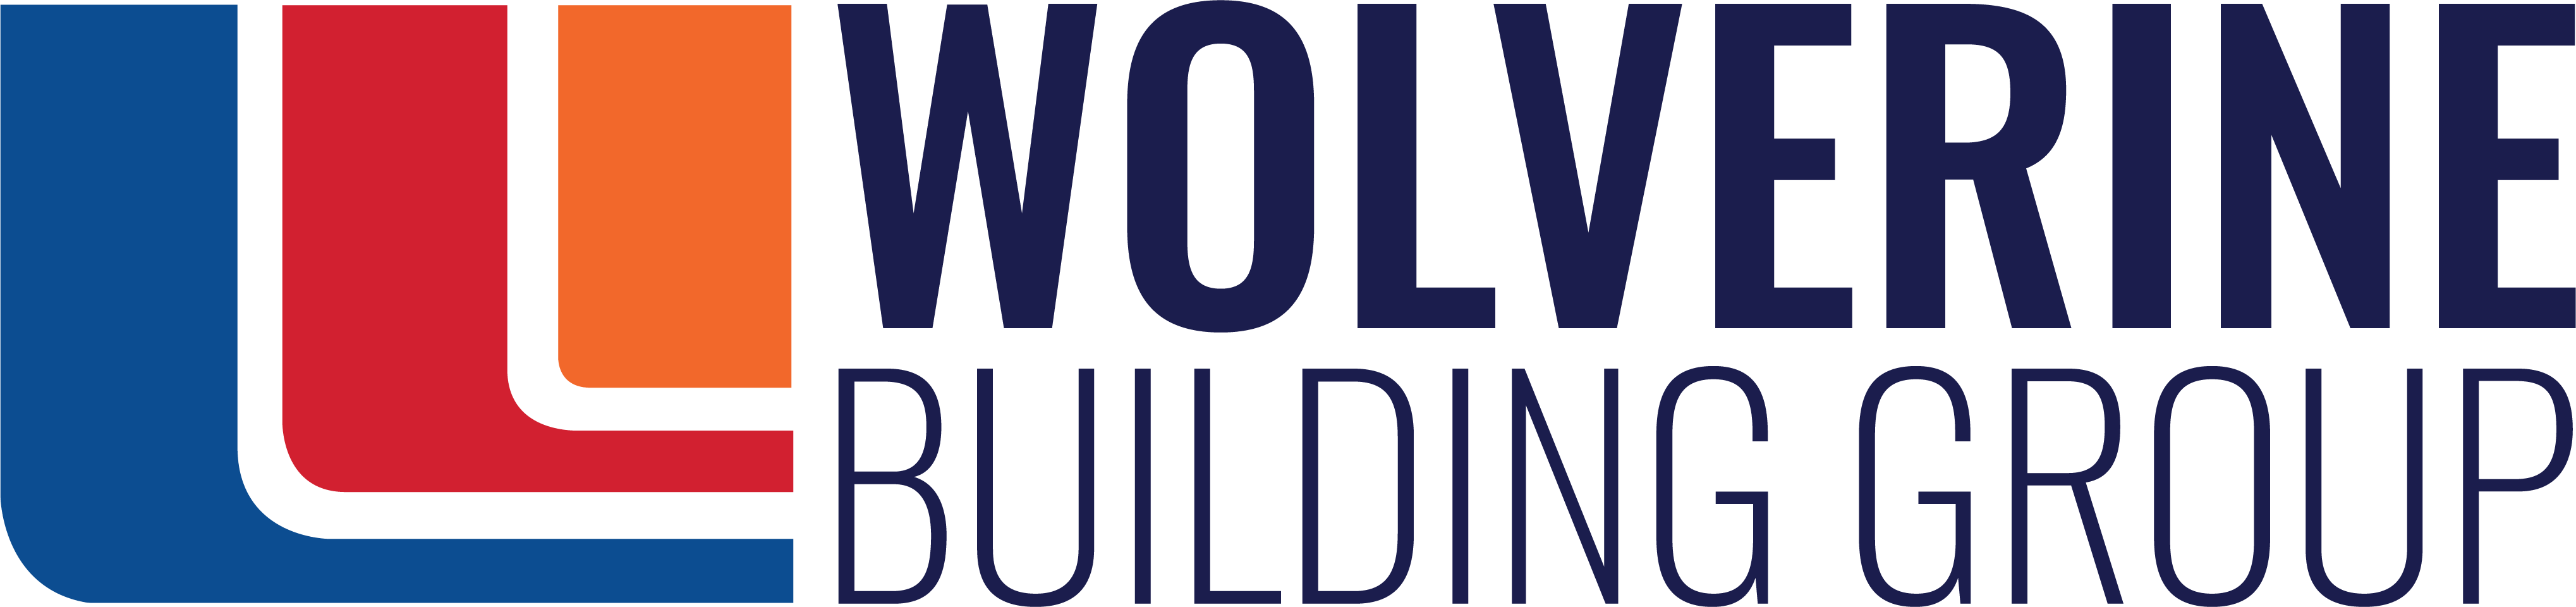 Wolverine Building Group Logo Partner Construction Allies in Action